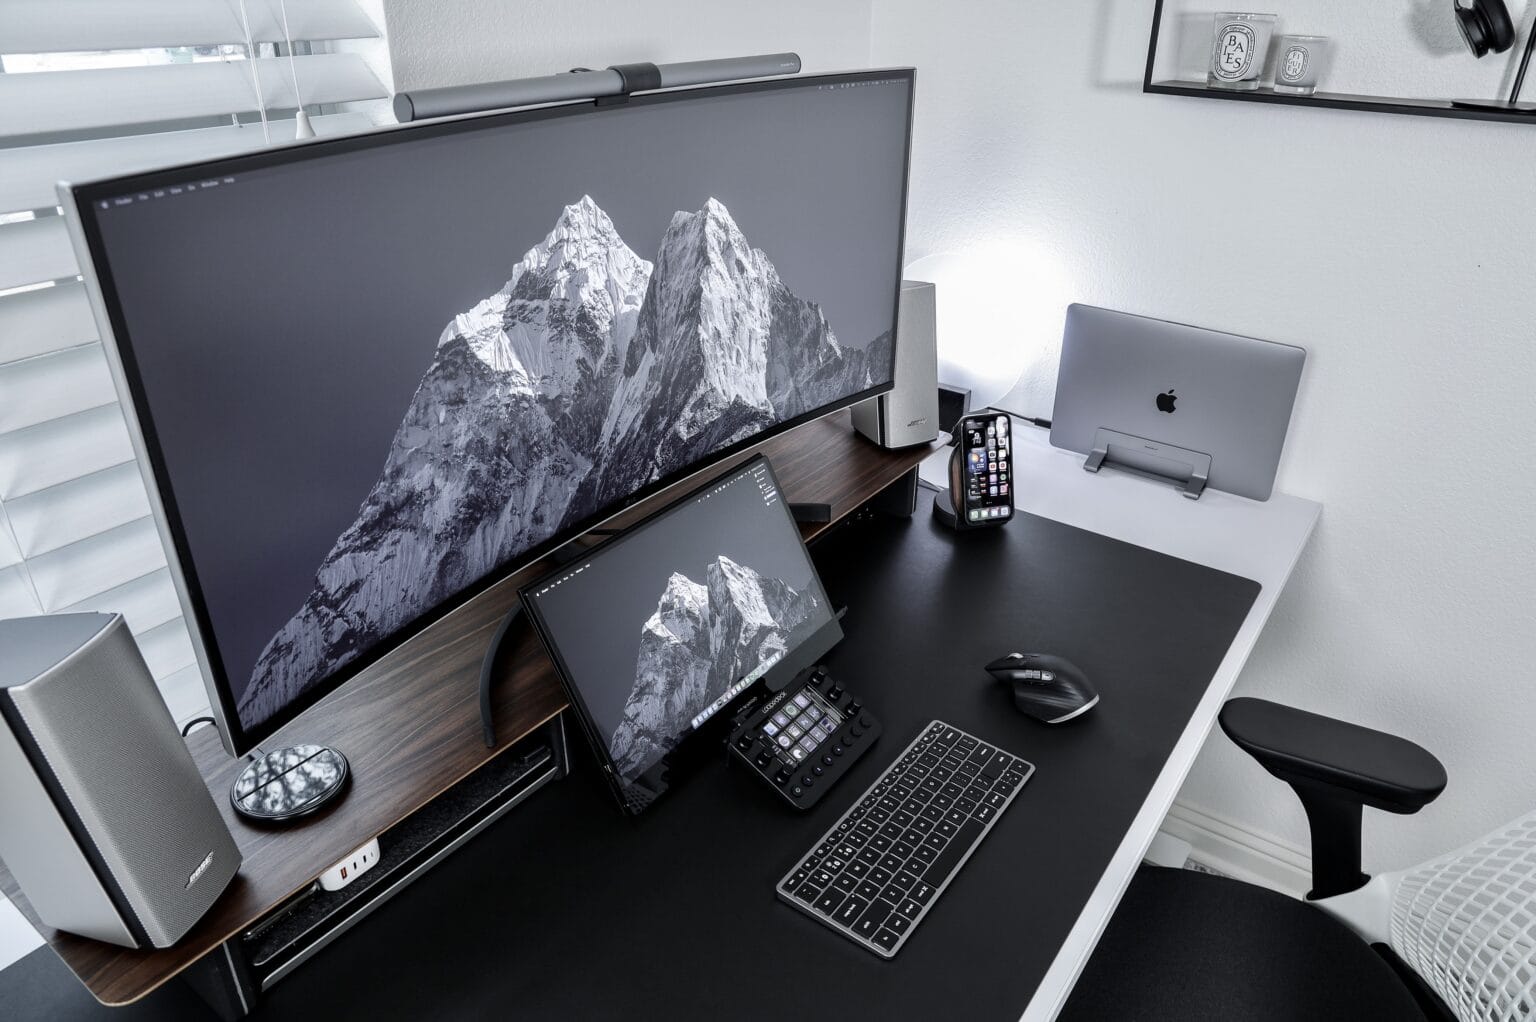 Instagram content creator Matt Tran runs his MacBook Pro with an ultrawide screen and a portable one for different reasons.